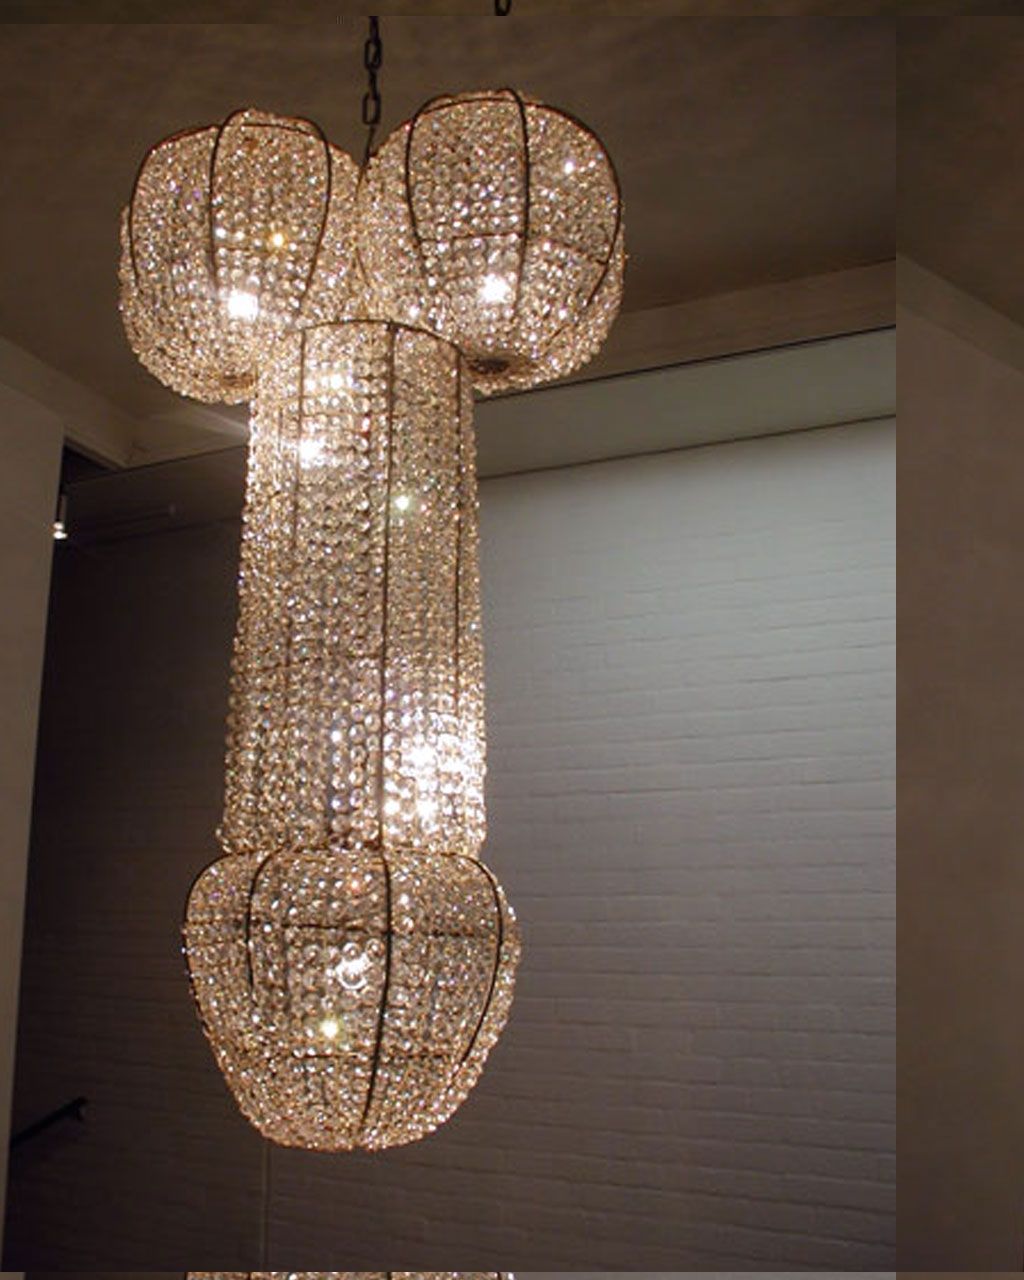 Chandelier Glamorous Contemporary Chandelier Lighting Intended For Modern Chandeliers (View 1 of 15)